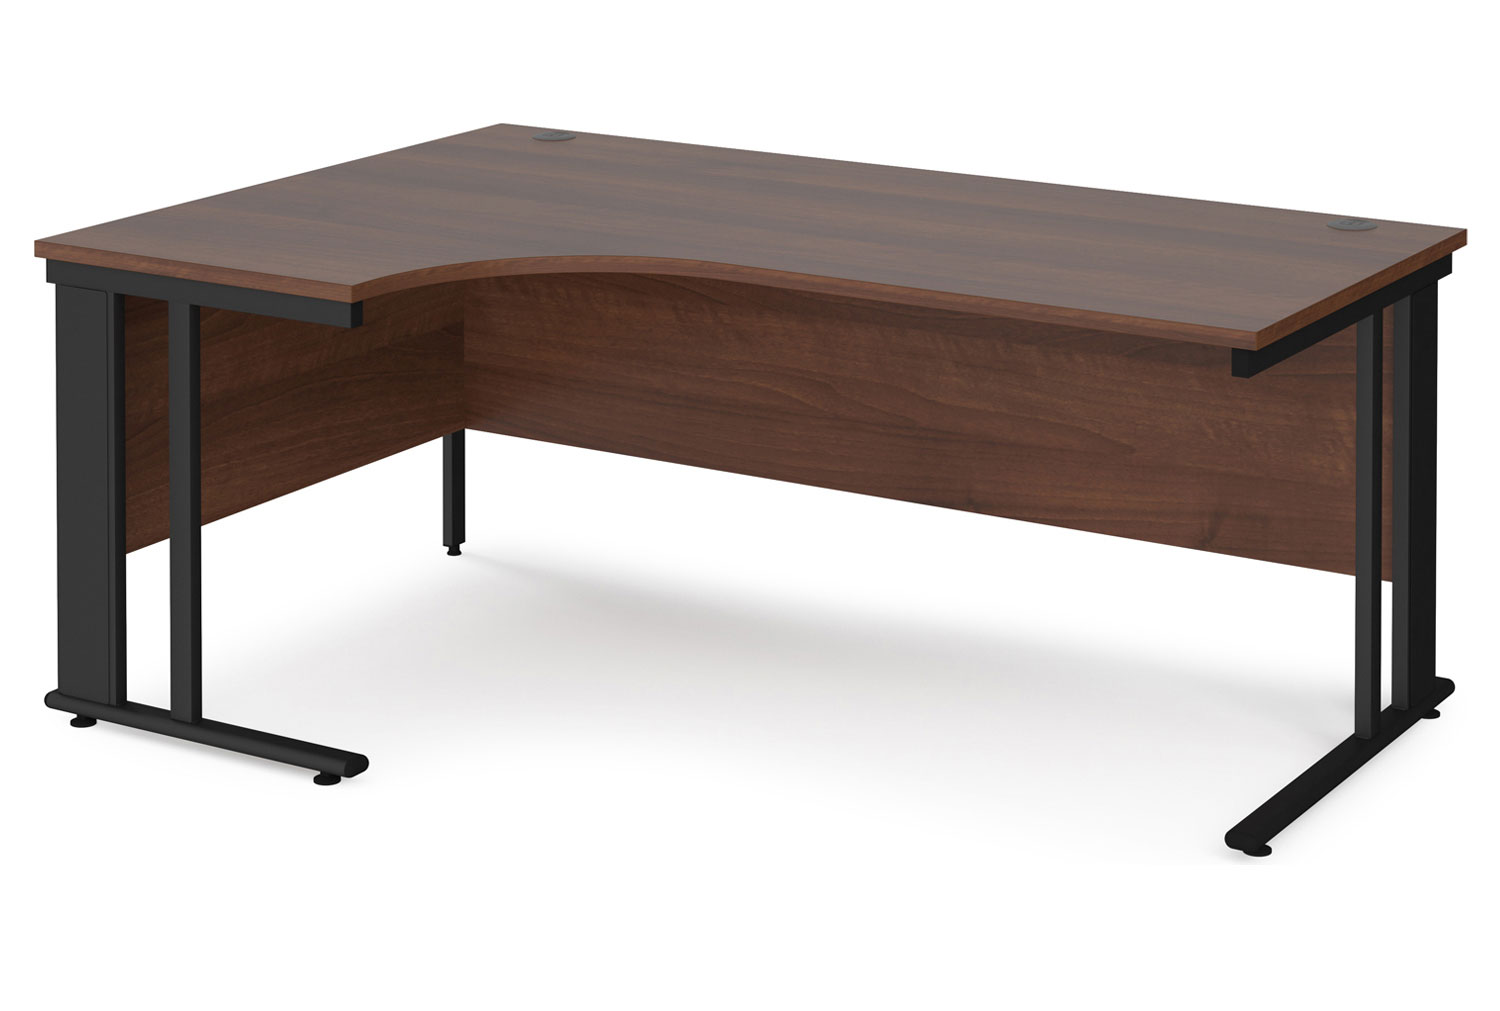 Value Line Deluxe Cable Managed Left Hand Ergo Office Desk (Black Legs), 180wx80dx73h (cm), Walnut, Express Delivery